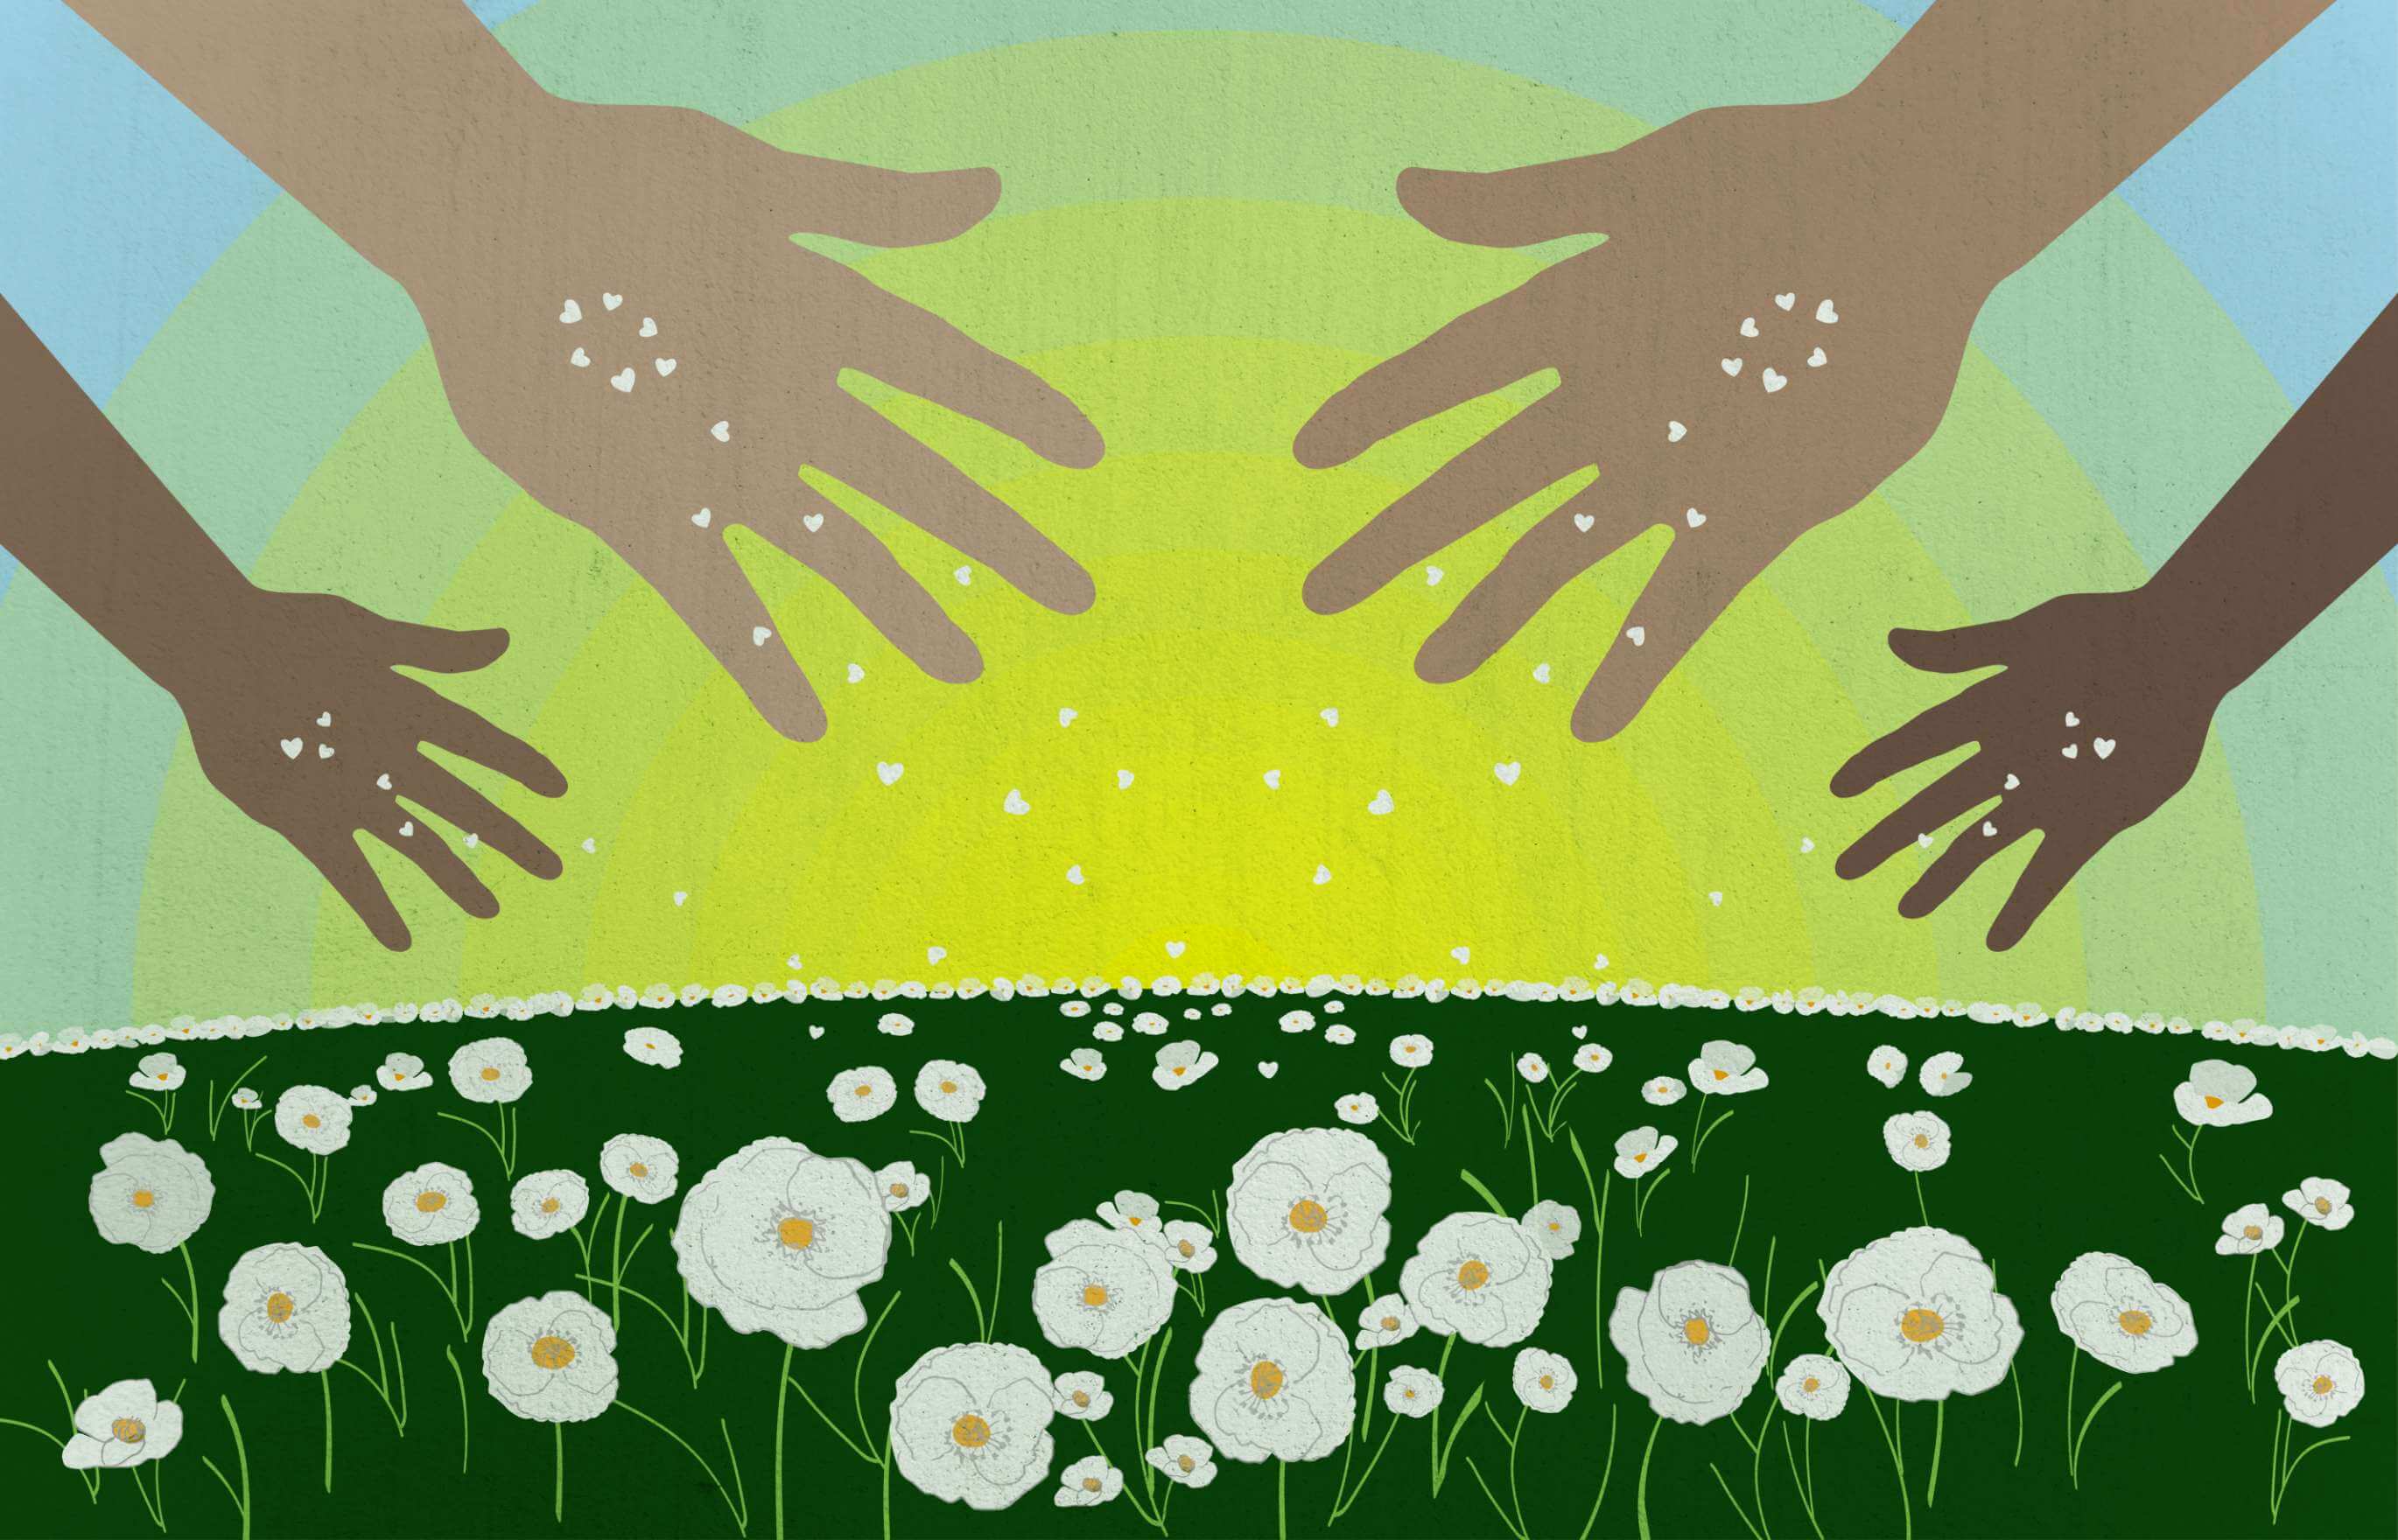 An illustration of four differently hued hands, extended from above, scattering white, heart-shaped seeds over a green meadow filled with white poppy flowers; concentric rings of yellow light radiate outward from the center of the horizon.